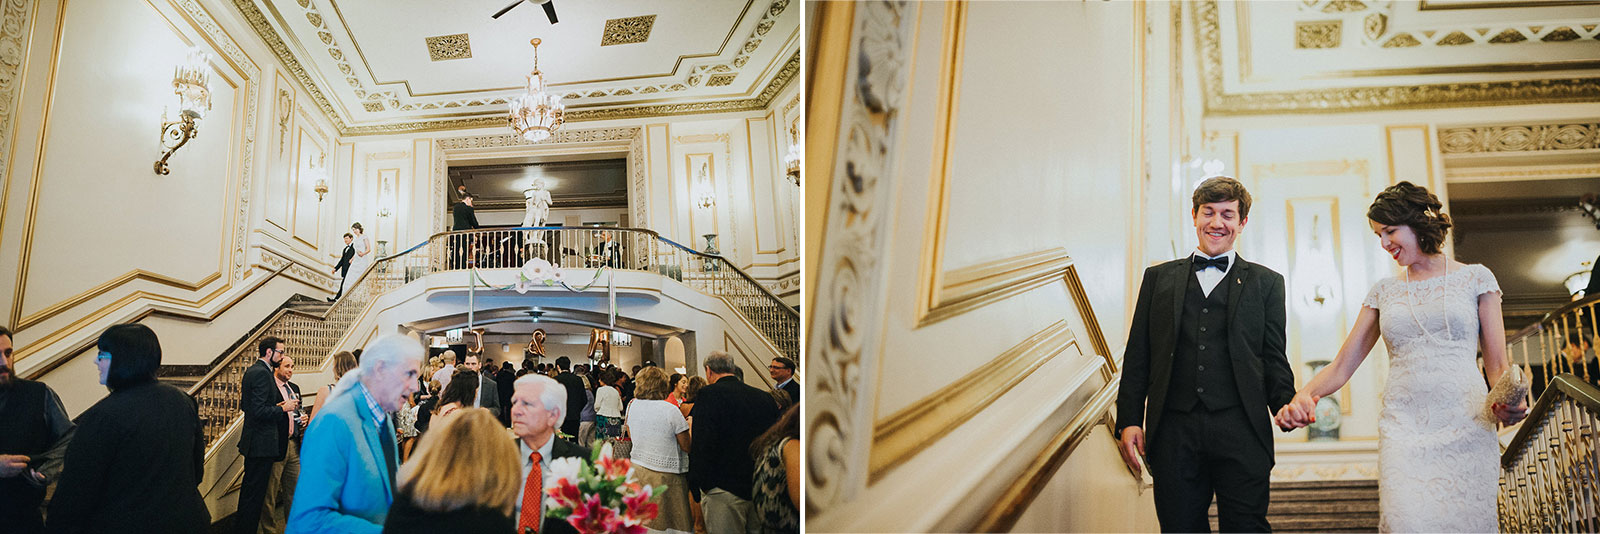 60 bride and groom coming down - Megan + Jon // Orpheum Wedding Photography in Madison